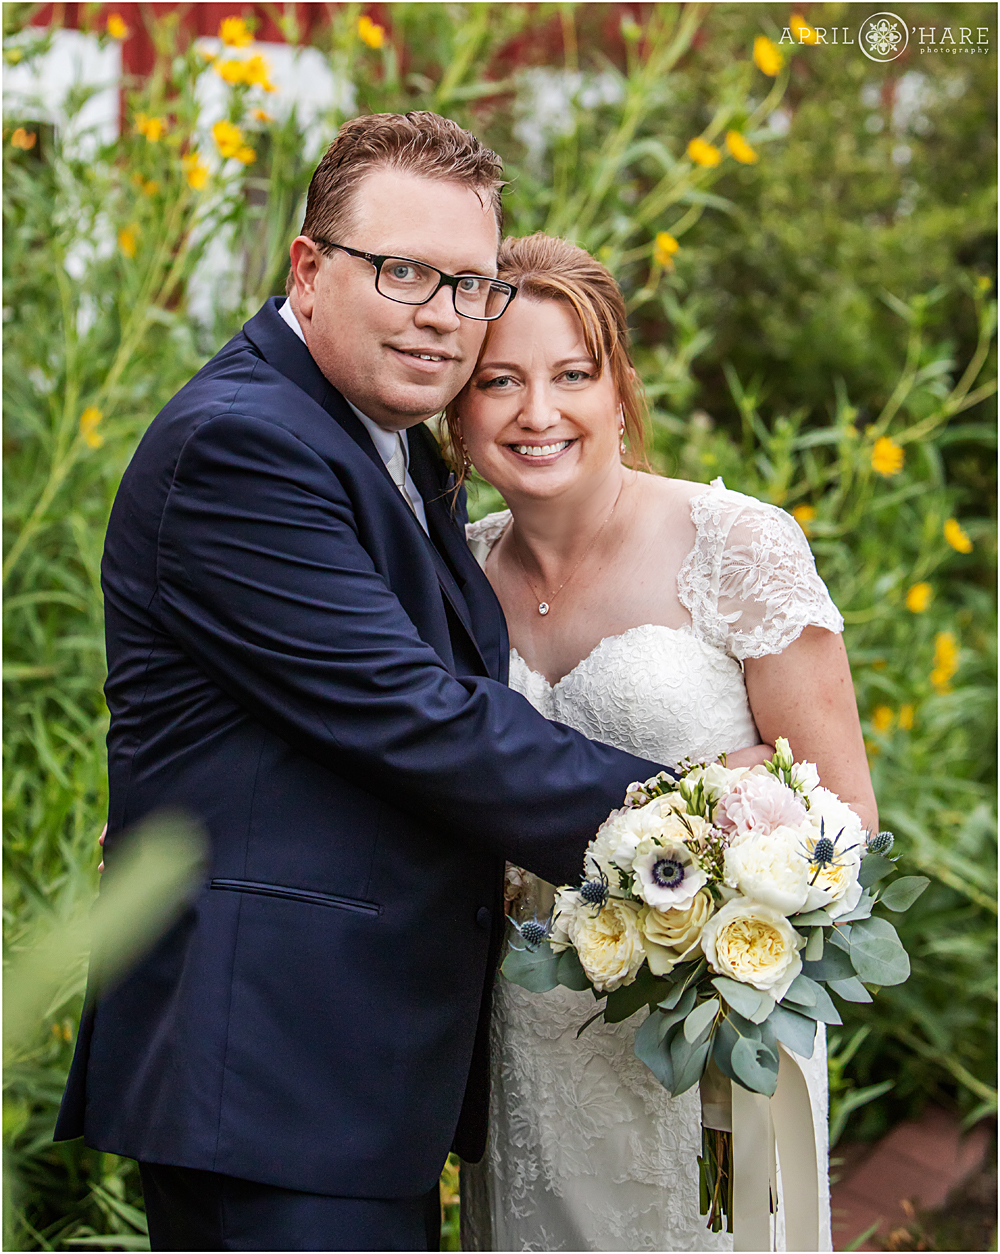 Wedding day portrait in the sunflowers at Chatfield Farms